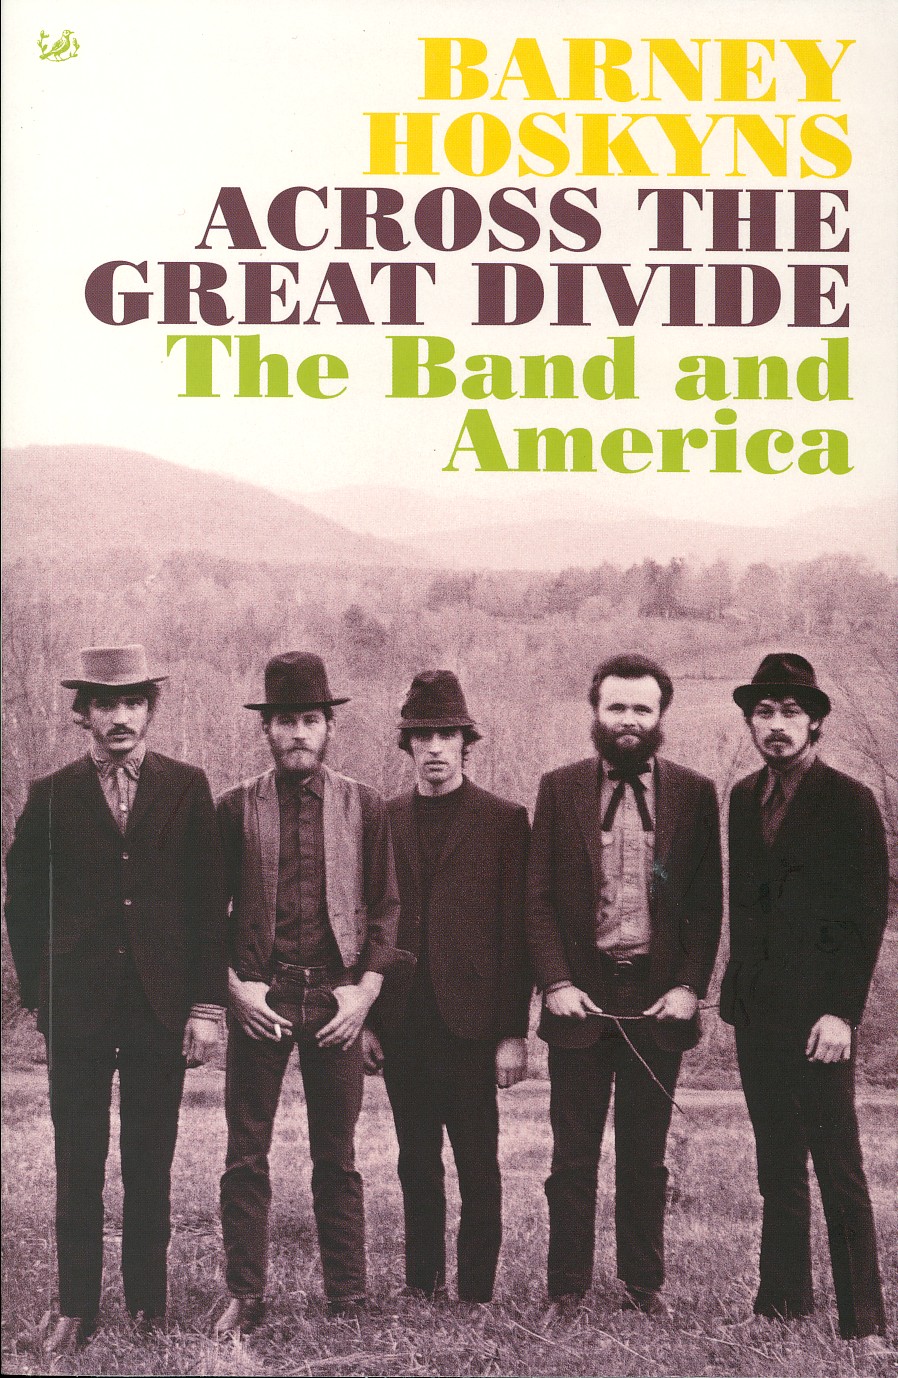 Across the Great Divide: The Band Barney Hoskyns